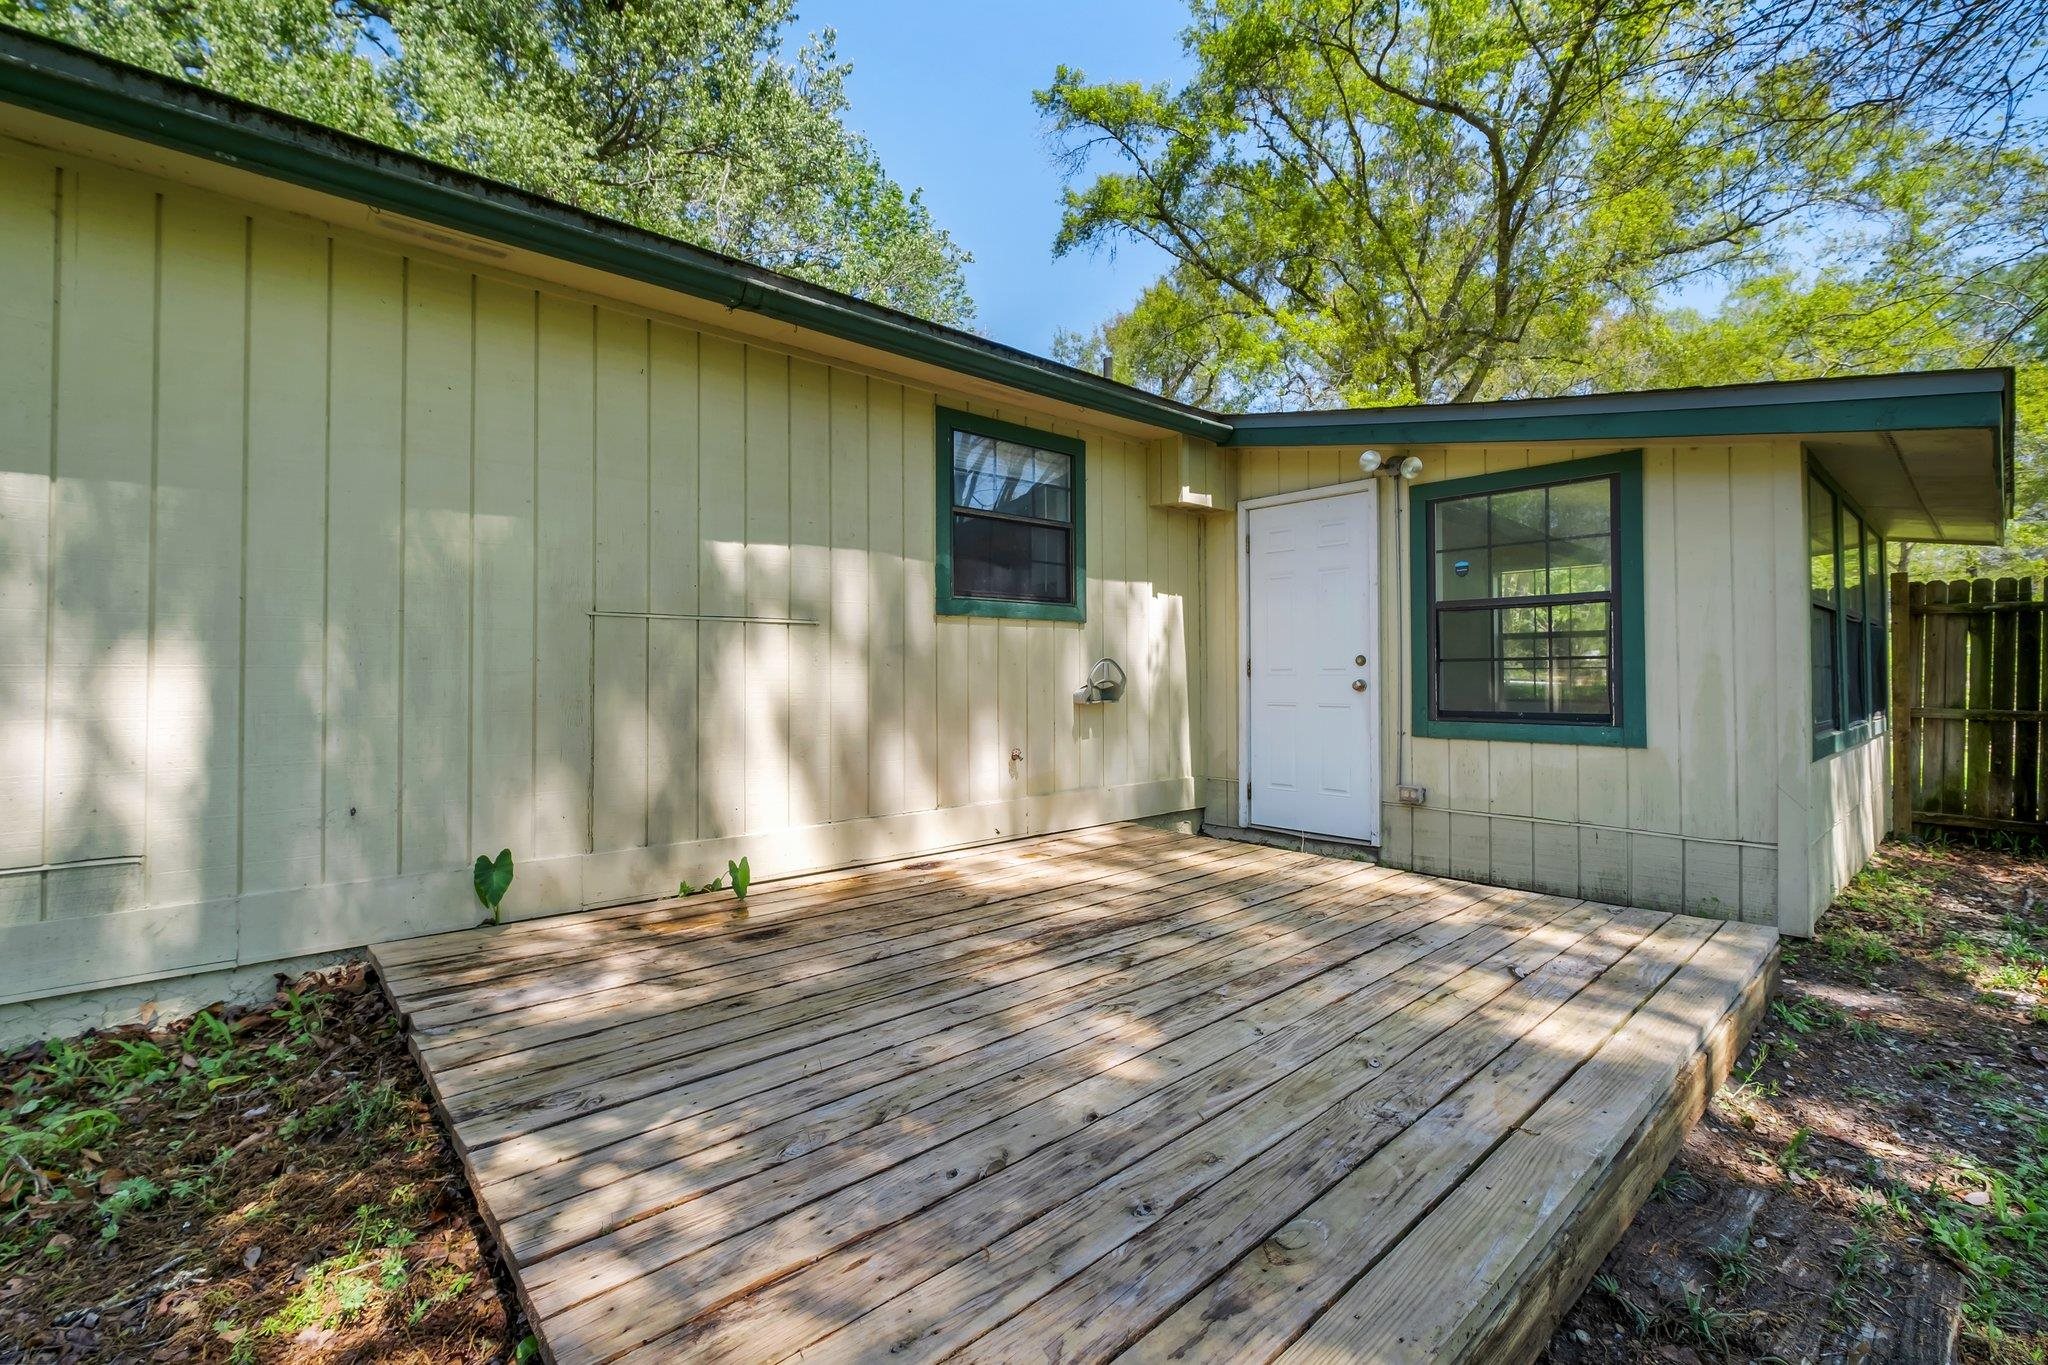 4404 Bright Drive,TALLAHASSEE,Florida 32303,2 Bedrooms Bedrooms,2 BathroomsBathrooms,Detached single family,4404 Bright Drive,370254